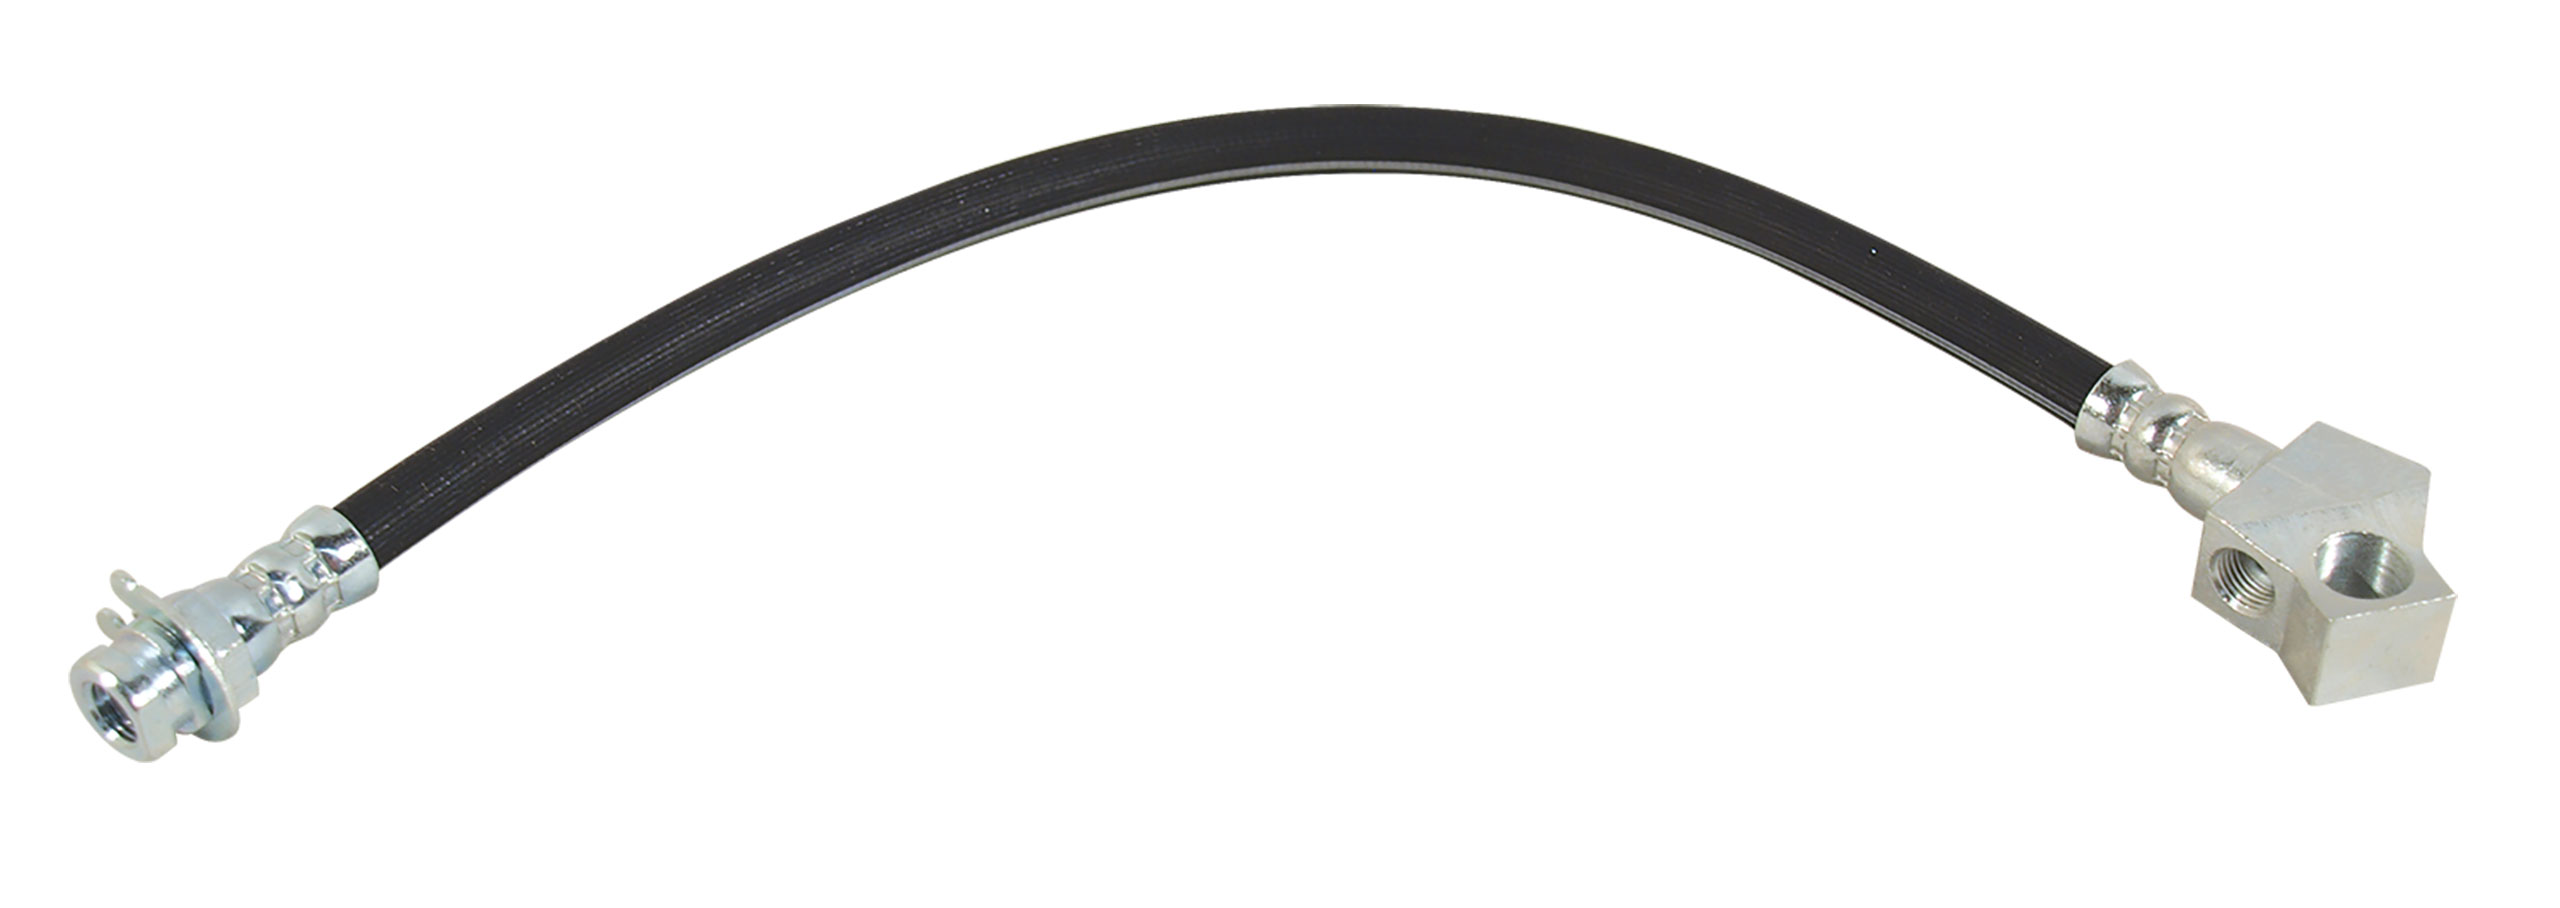 Mr. Mustang 1964-1966 Ford Mustang Rear Brake Hose - Single Exhaust - Except Hi-Perf